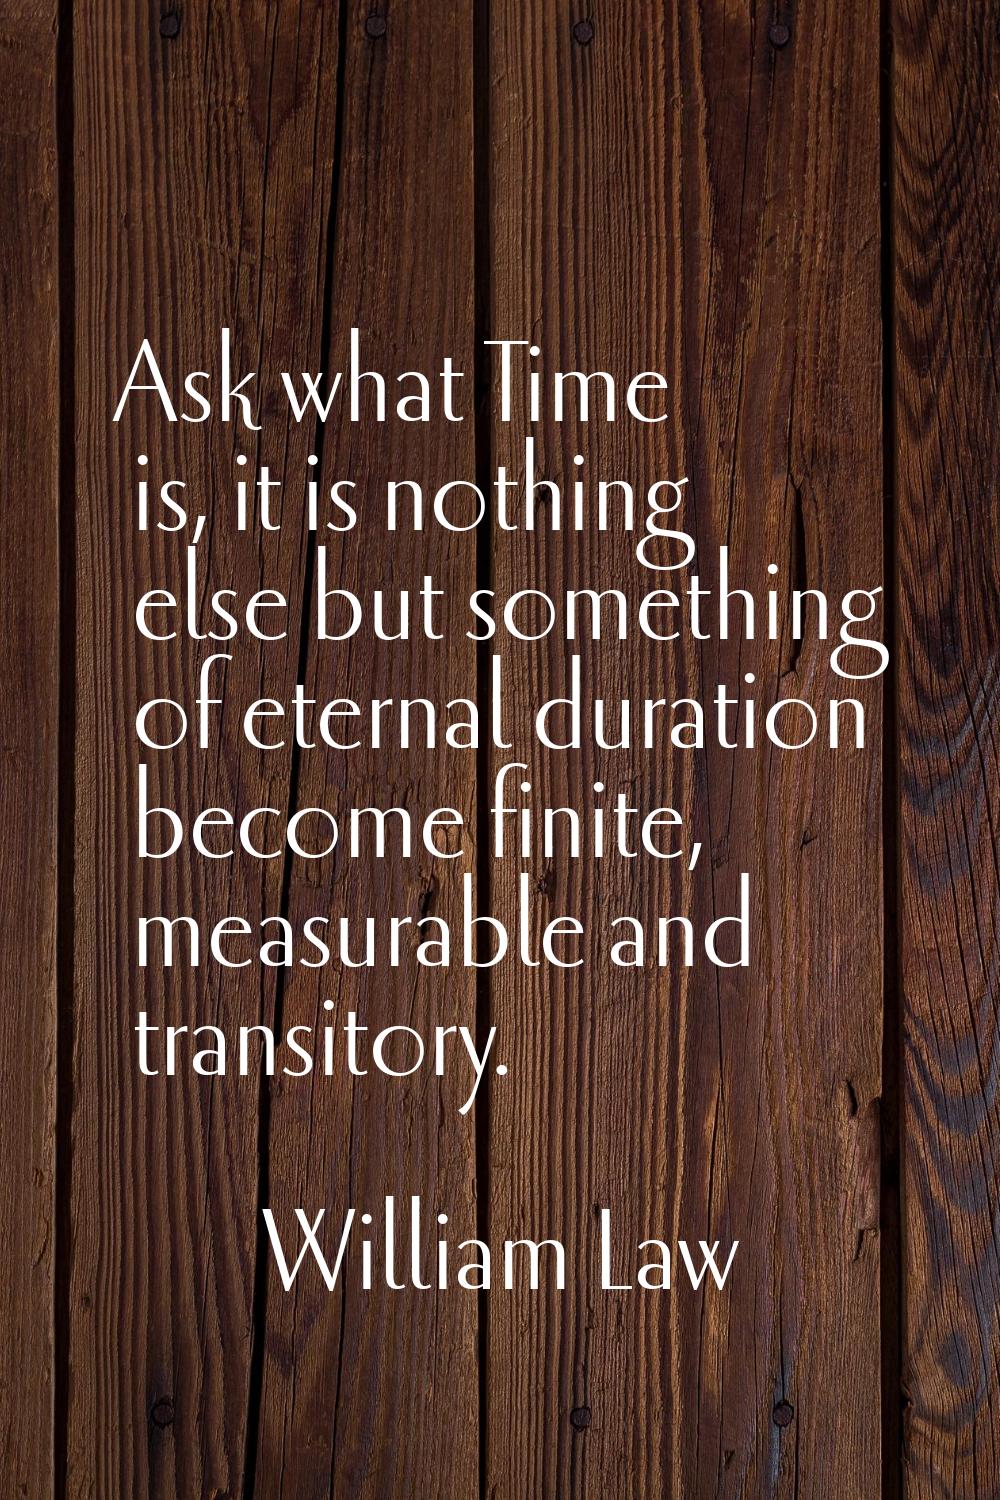 Ask what Time is, it is nothing else but something of eternal duration become finite, measurable an